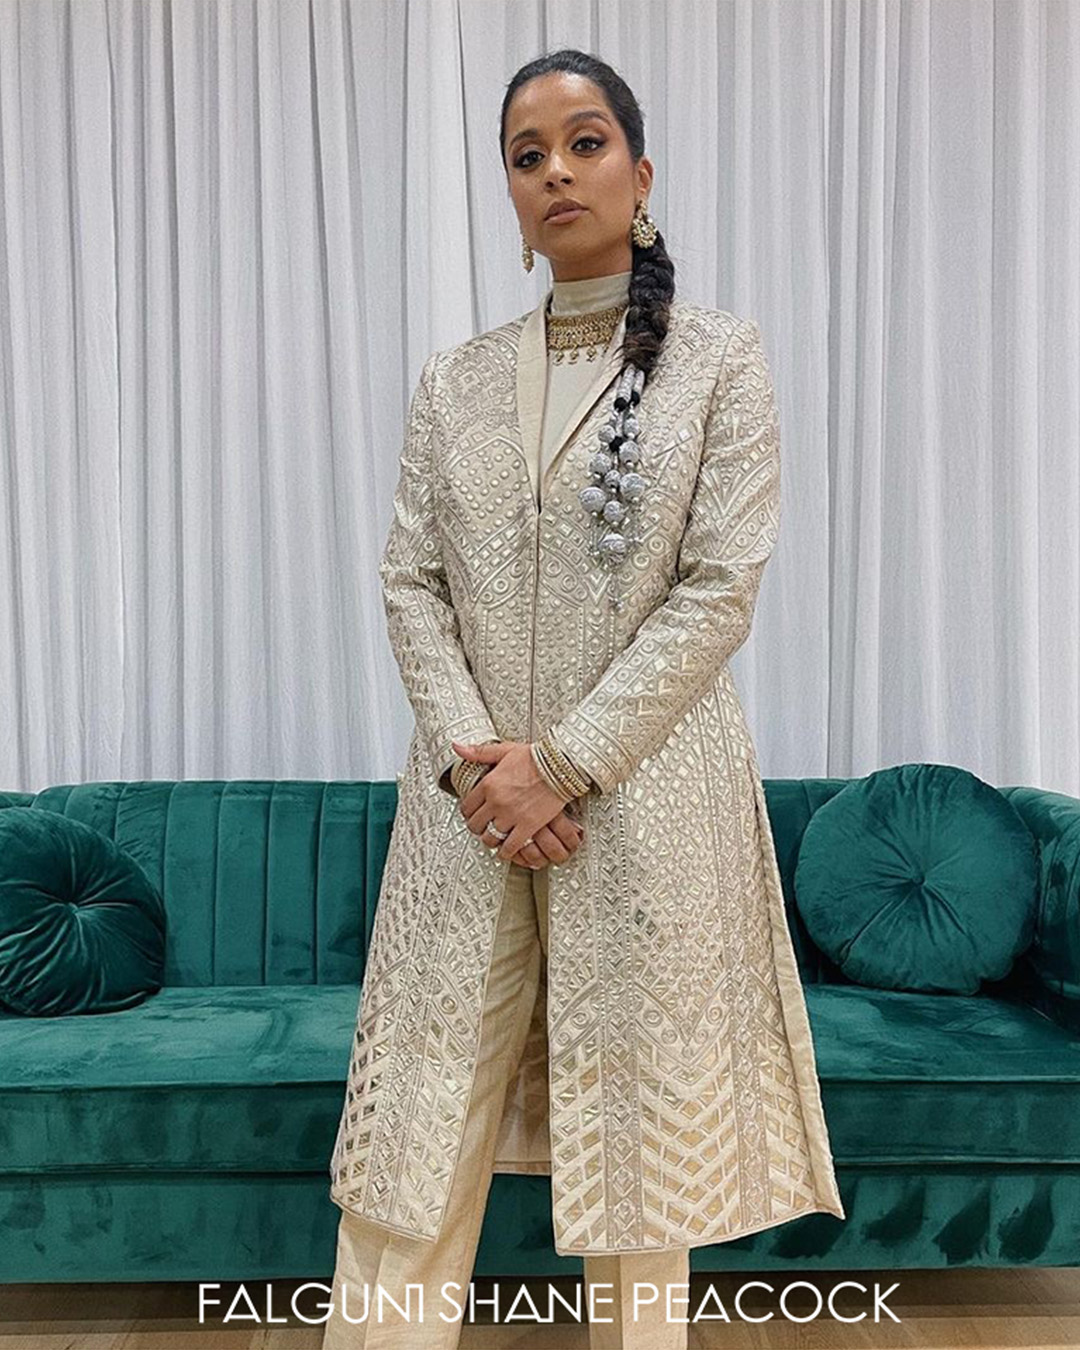 Lilly Singh dropped jaws in a Falguni Shane Peacock